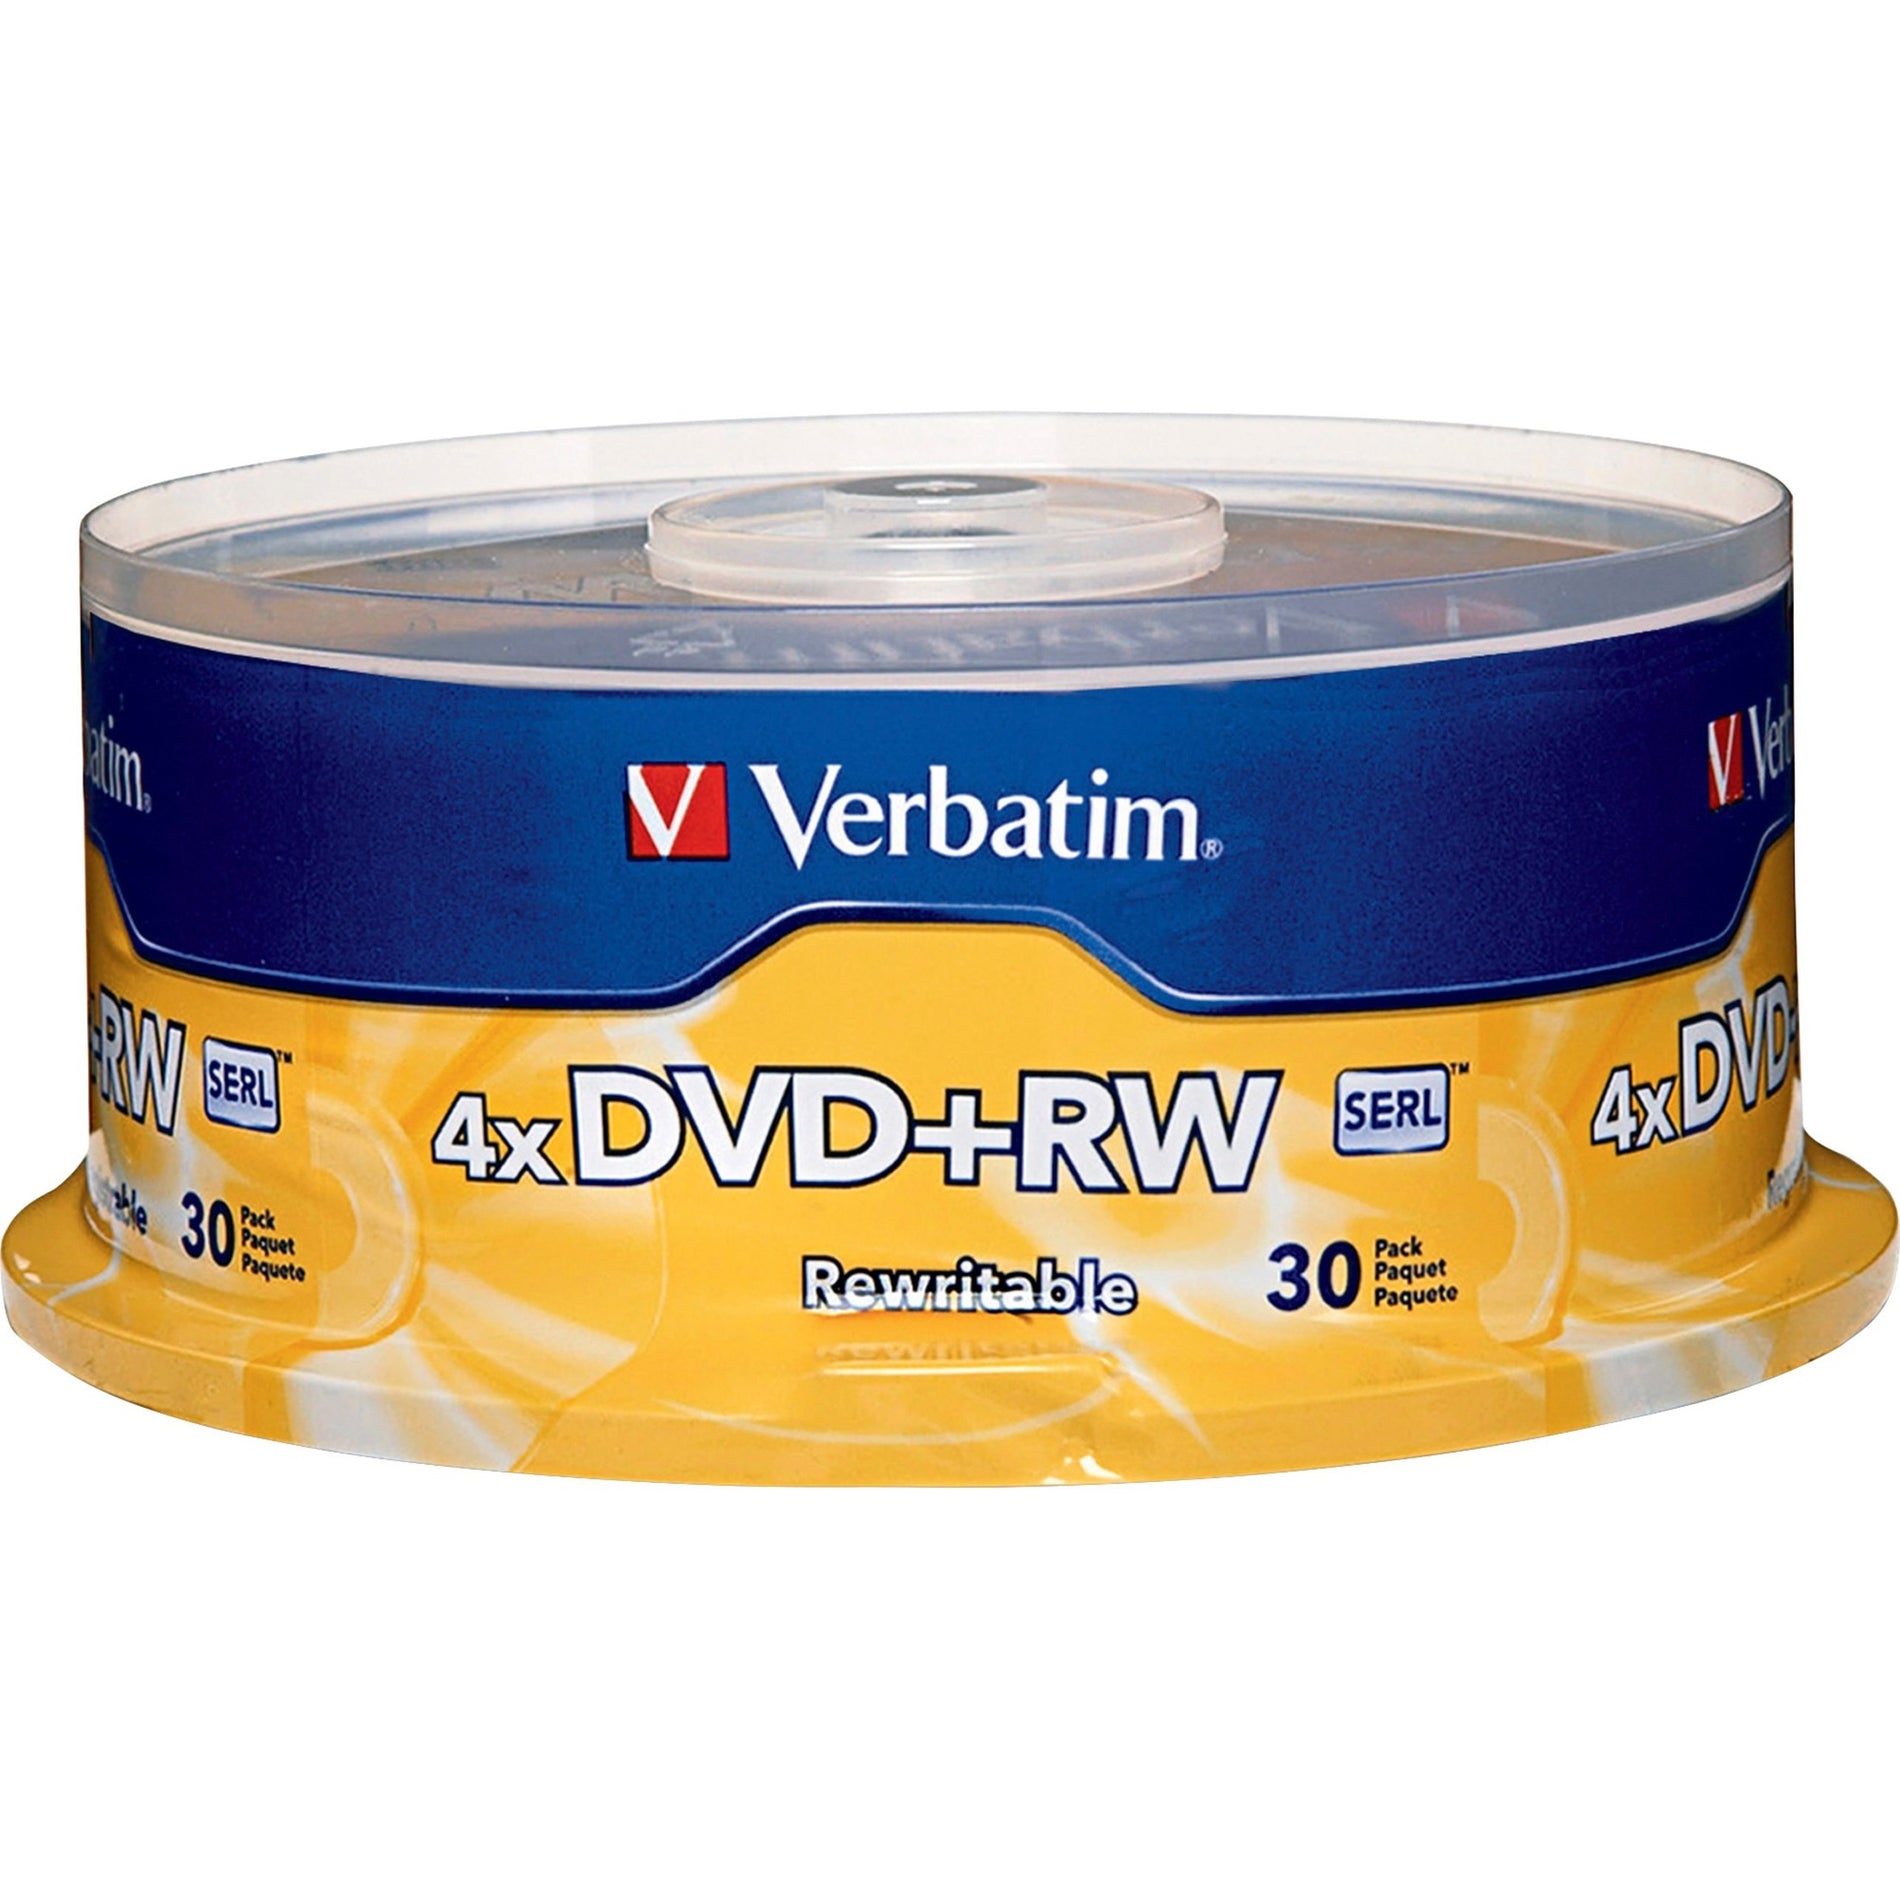 Verbatim 94834 DVD+RW 4.7GB 4X with Branded Surface, 30/PK Spindle